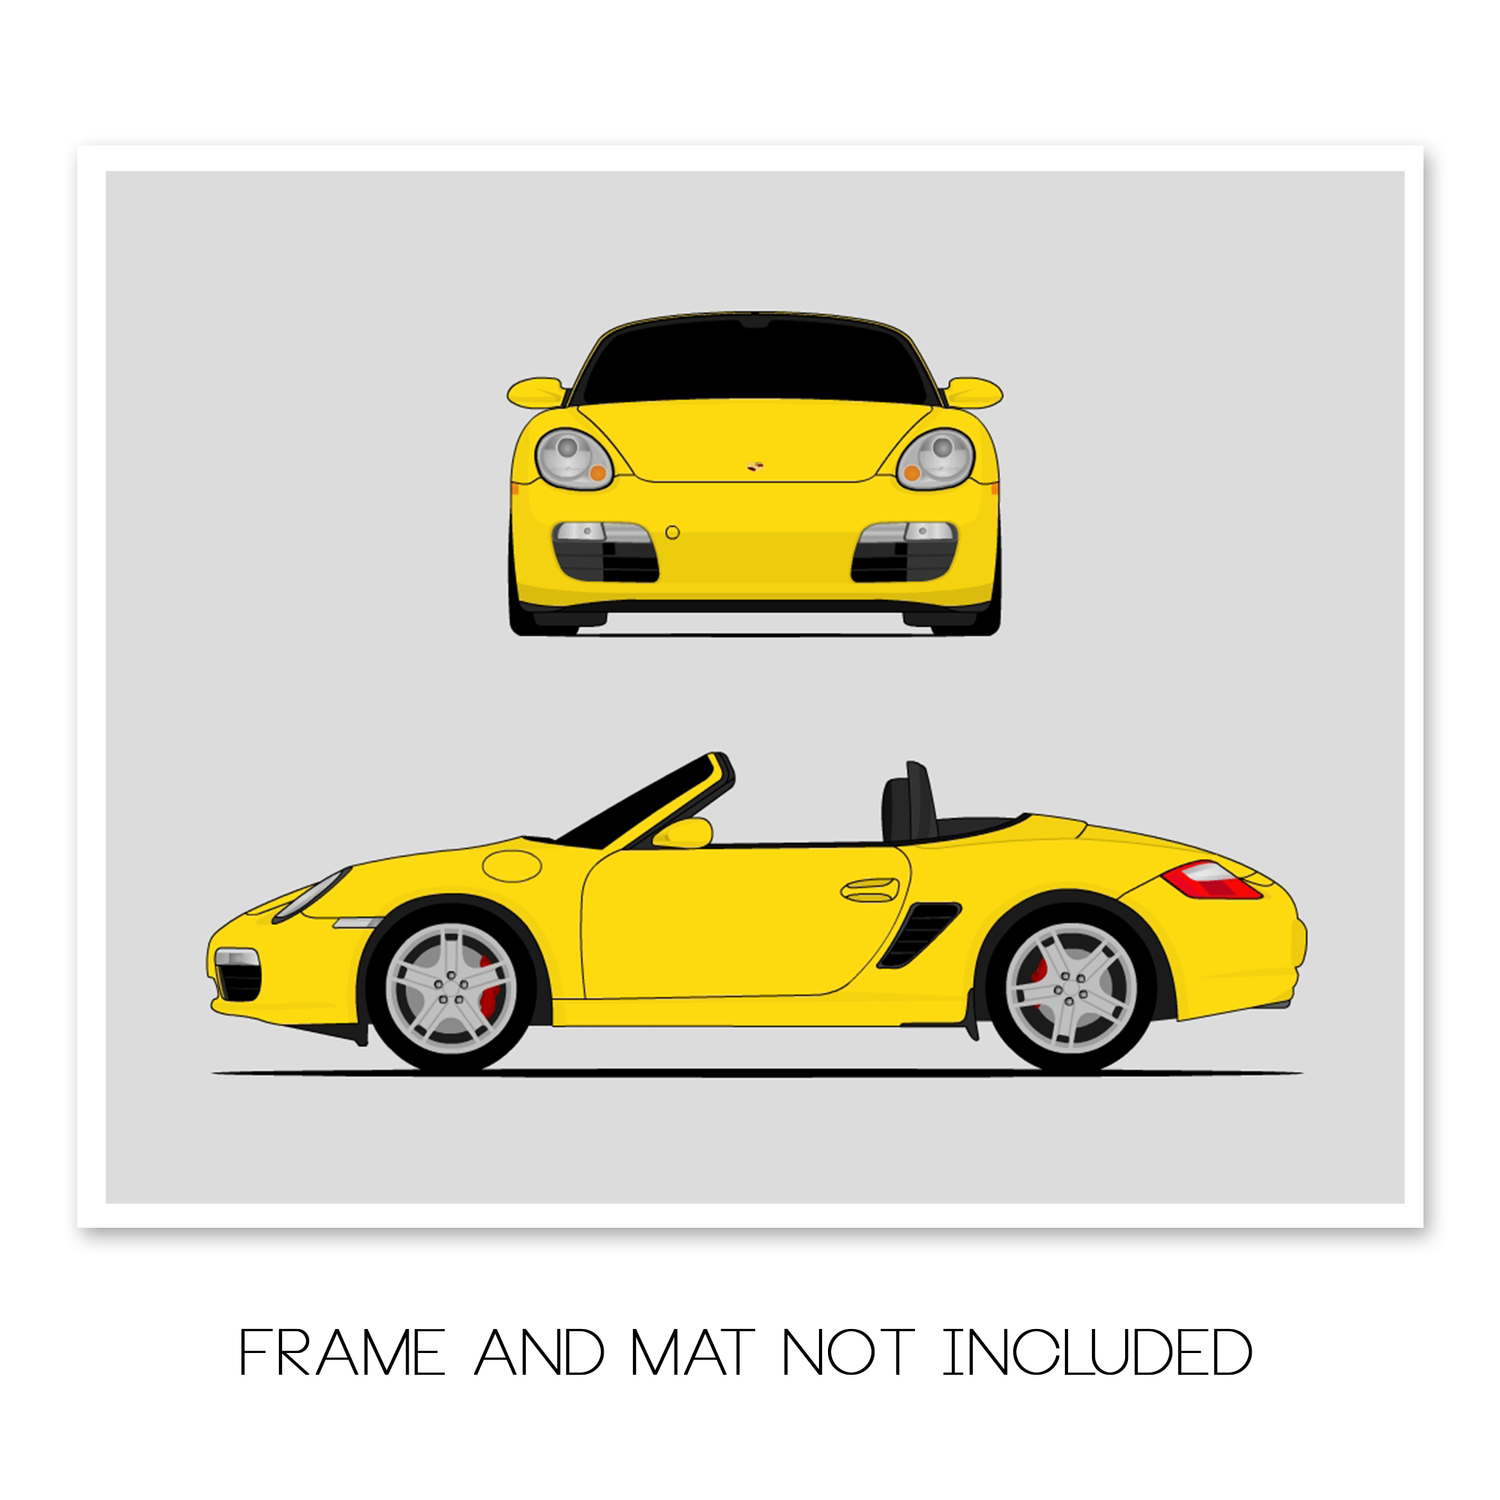 Porsche Poster - cArt Poster Check out the link in our bio or our